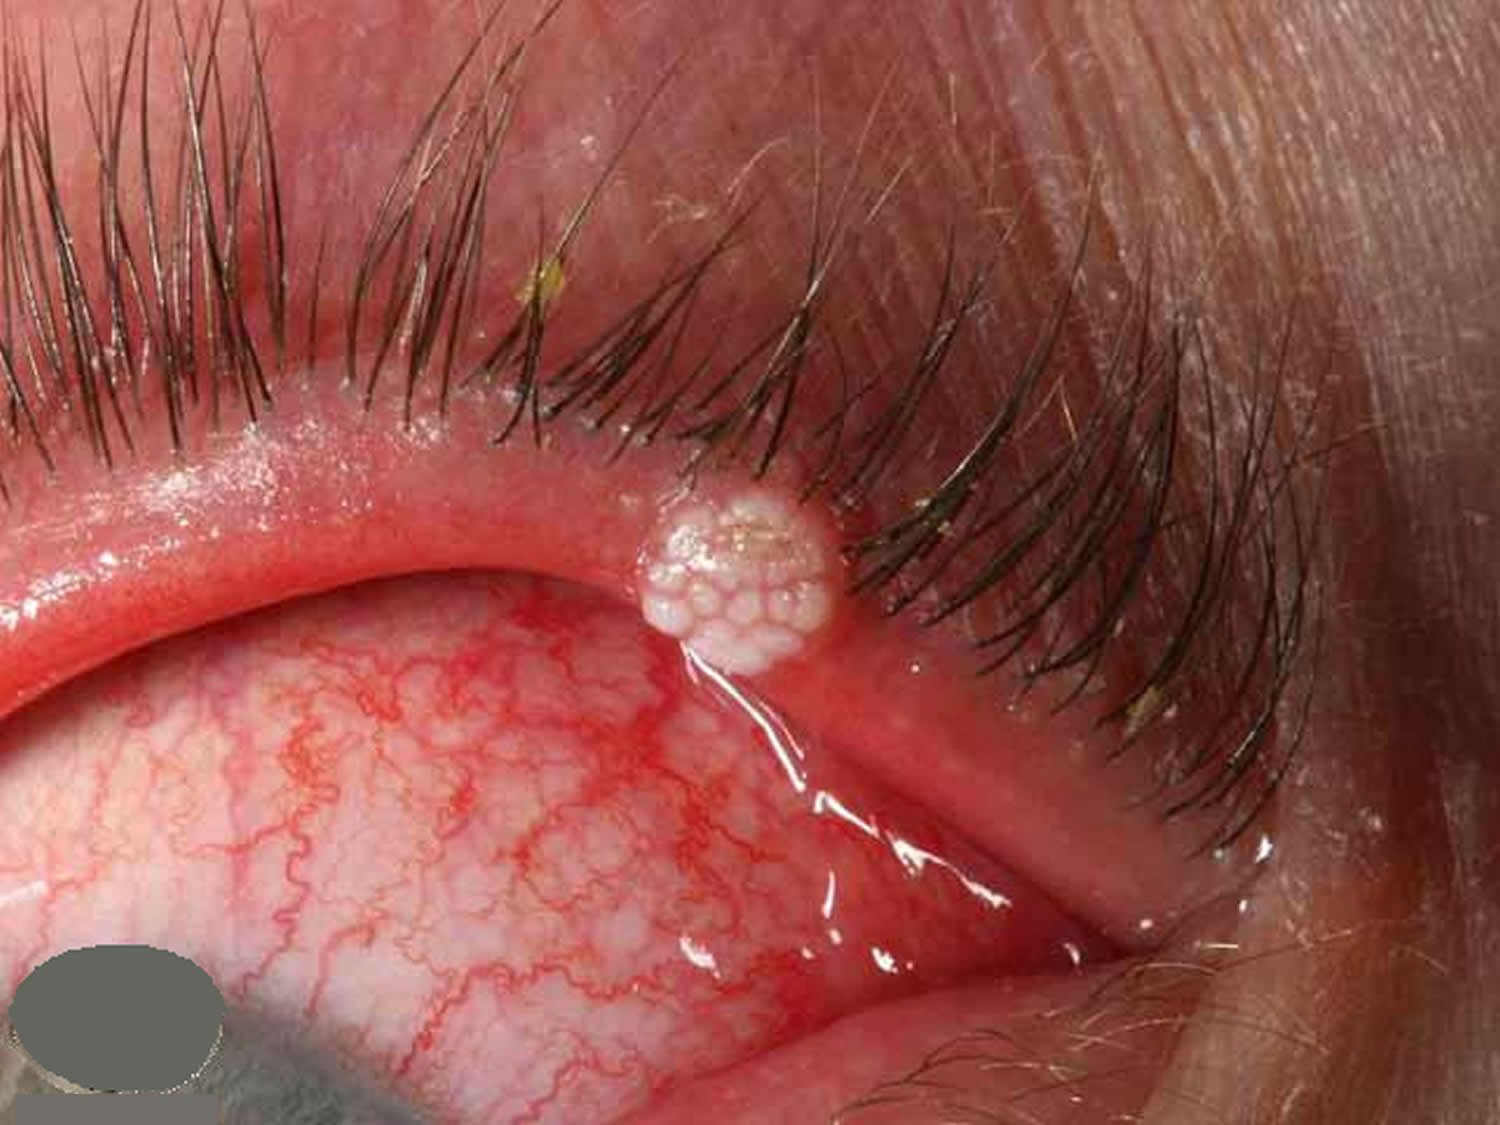 Pimple On Eyelid - Types, Causes & How To Treat Them